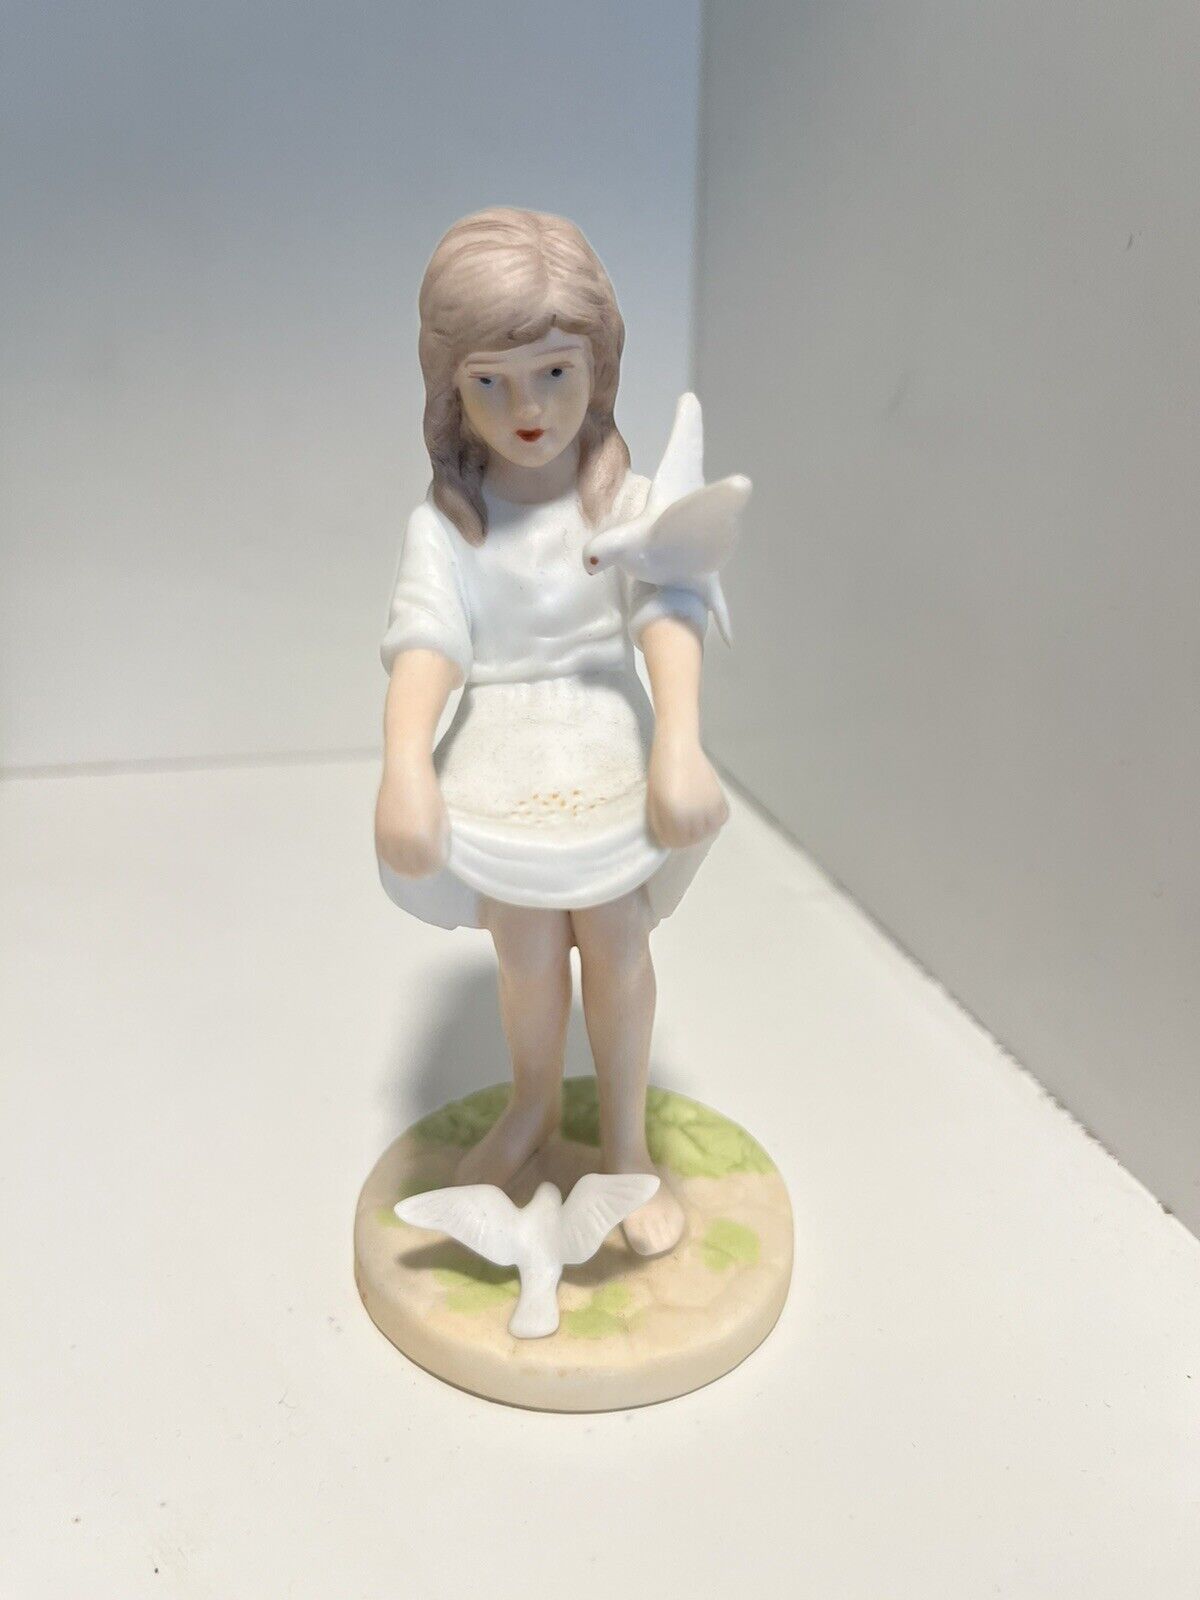 Porcelain Figurine Girl In White Dress With Doves By The Heirloom Traditions